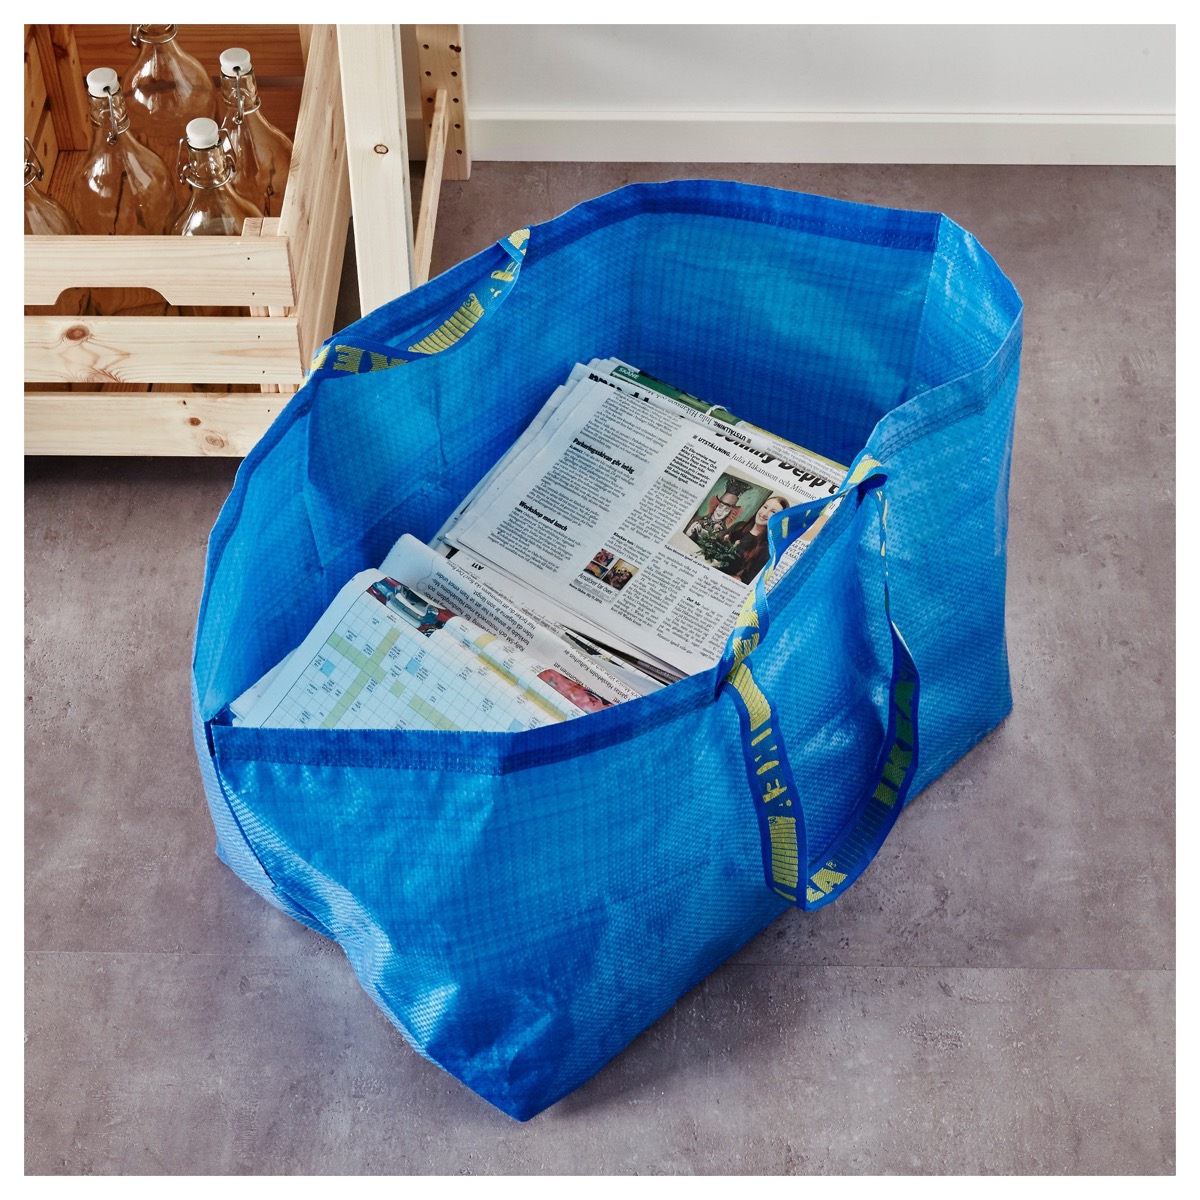 Ikea Bag for Recycling {Other Uses For Blue Ikea Bag}